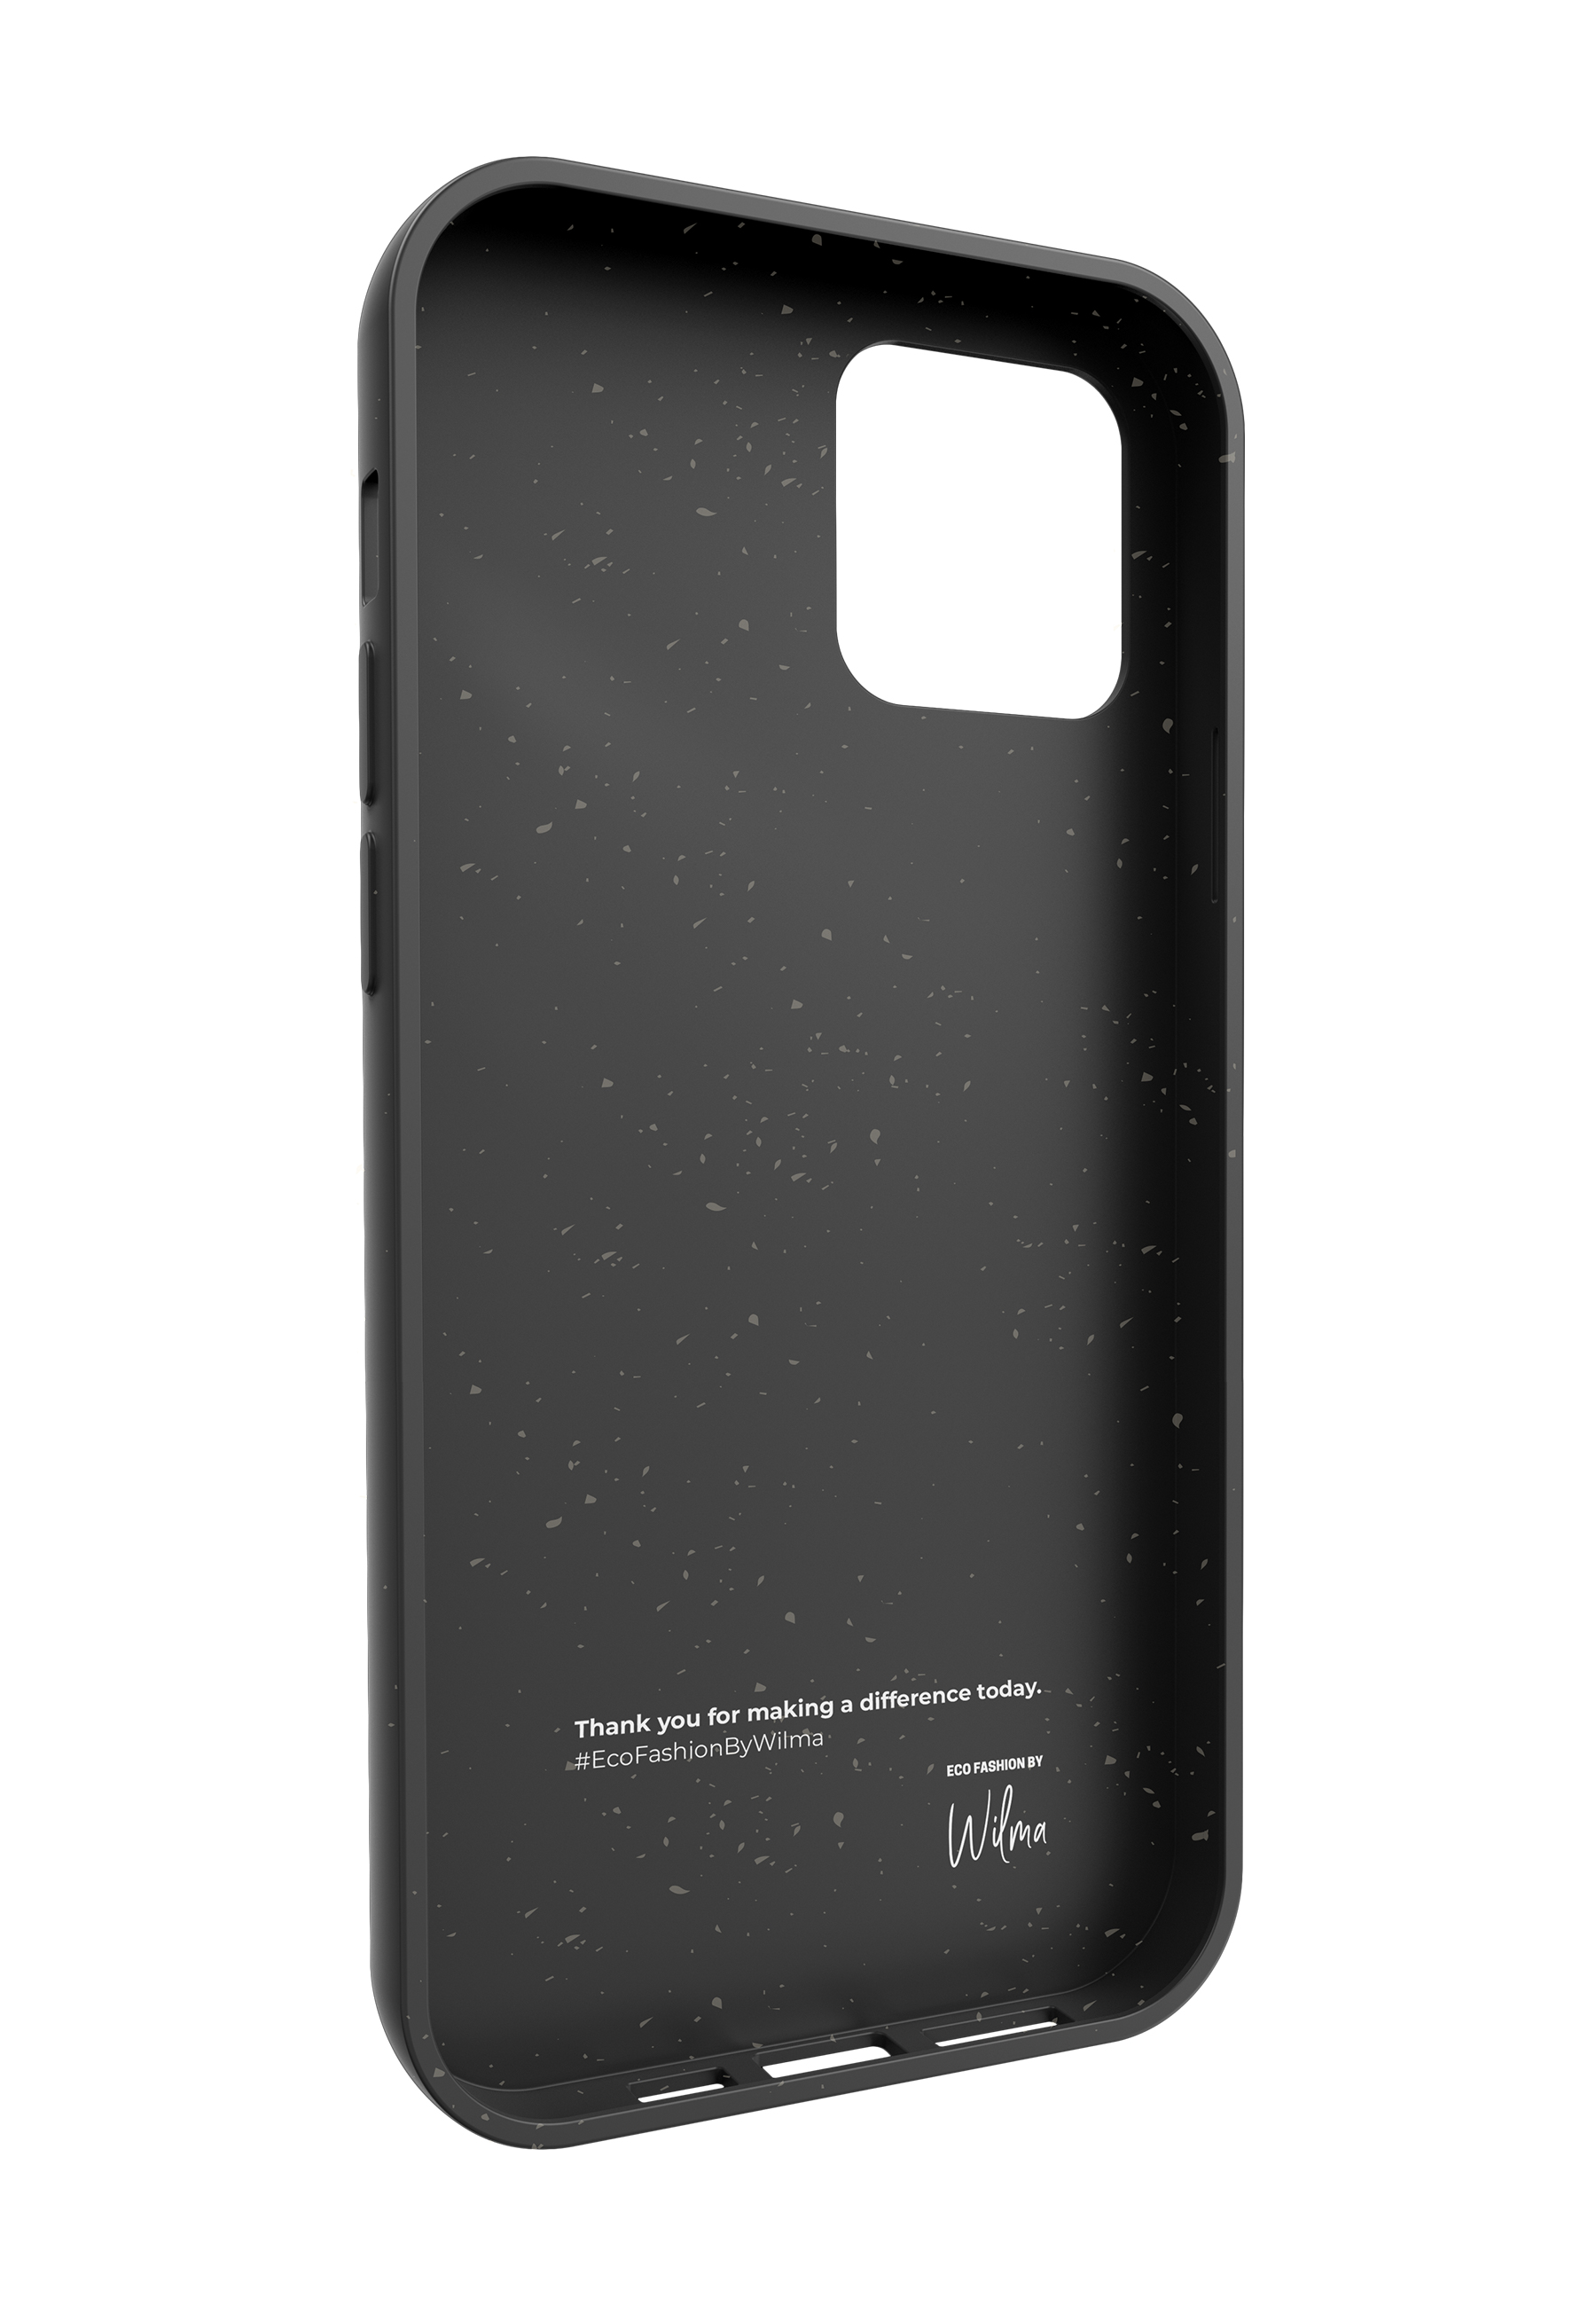 ECO FASHION black 12 BY Pro iPhone P12PM, WILMA Apple, Max, Backcover